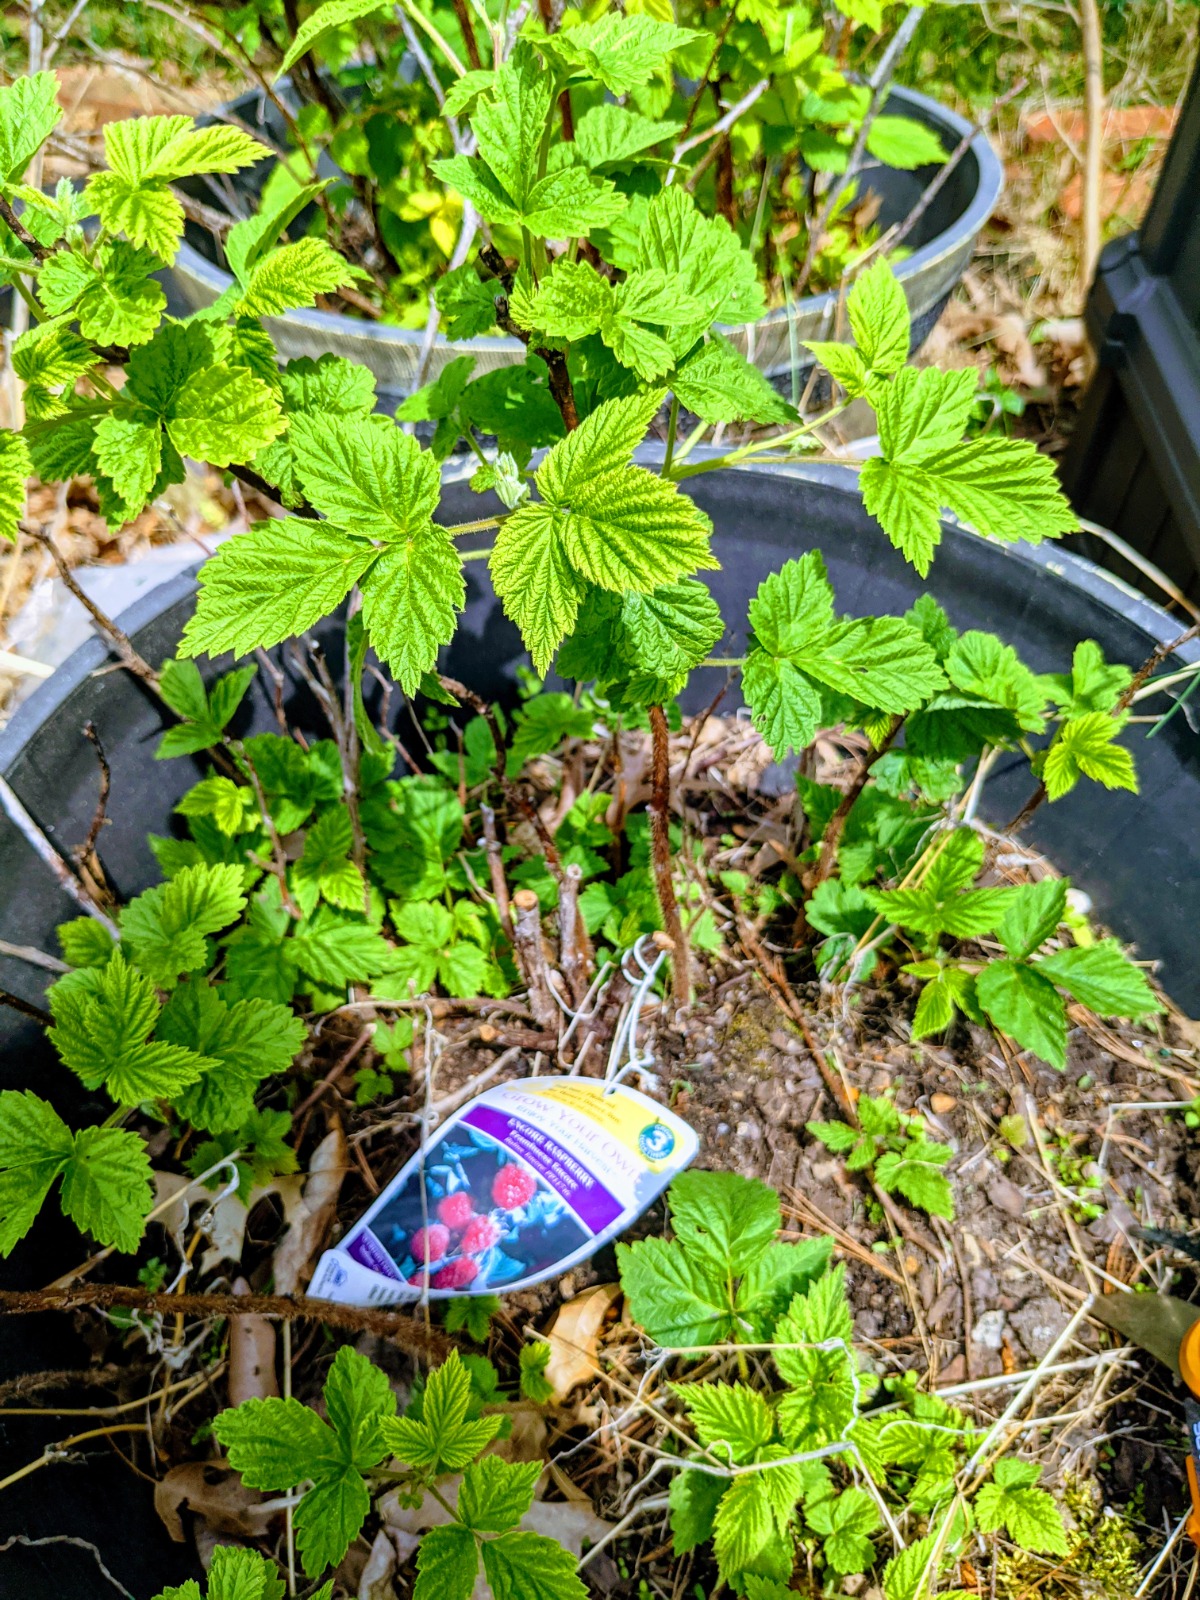 Companion Planting Raspberry Bushes gives you more mileage out of your garden space.